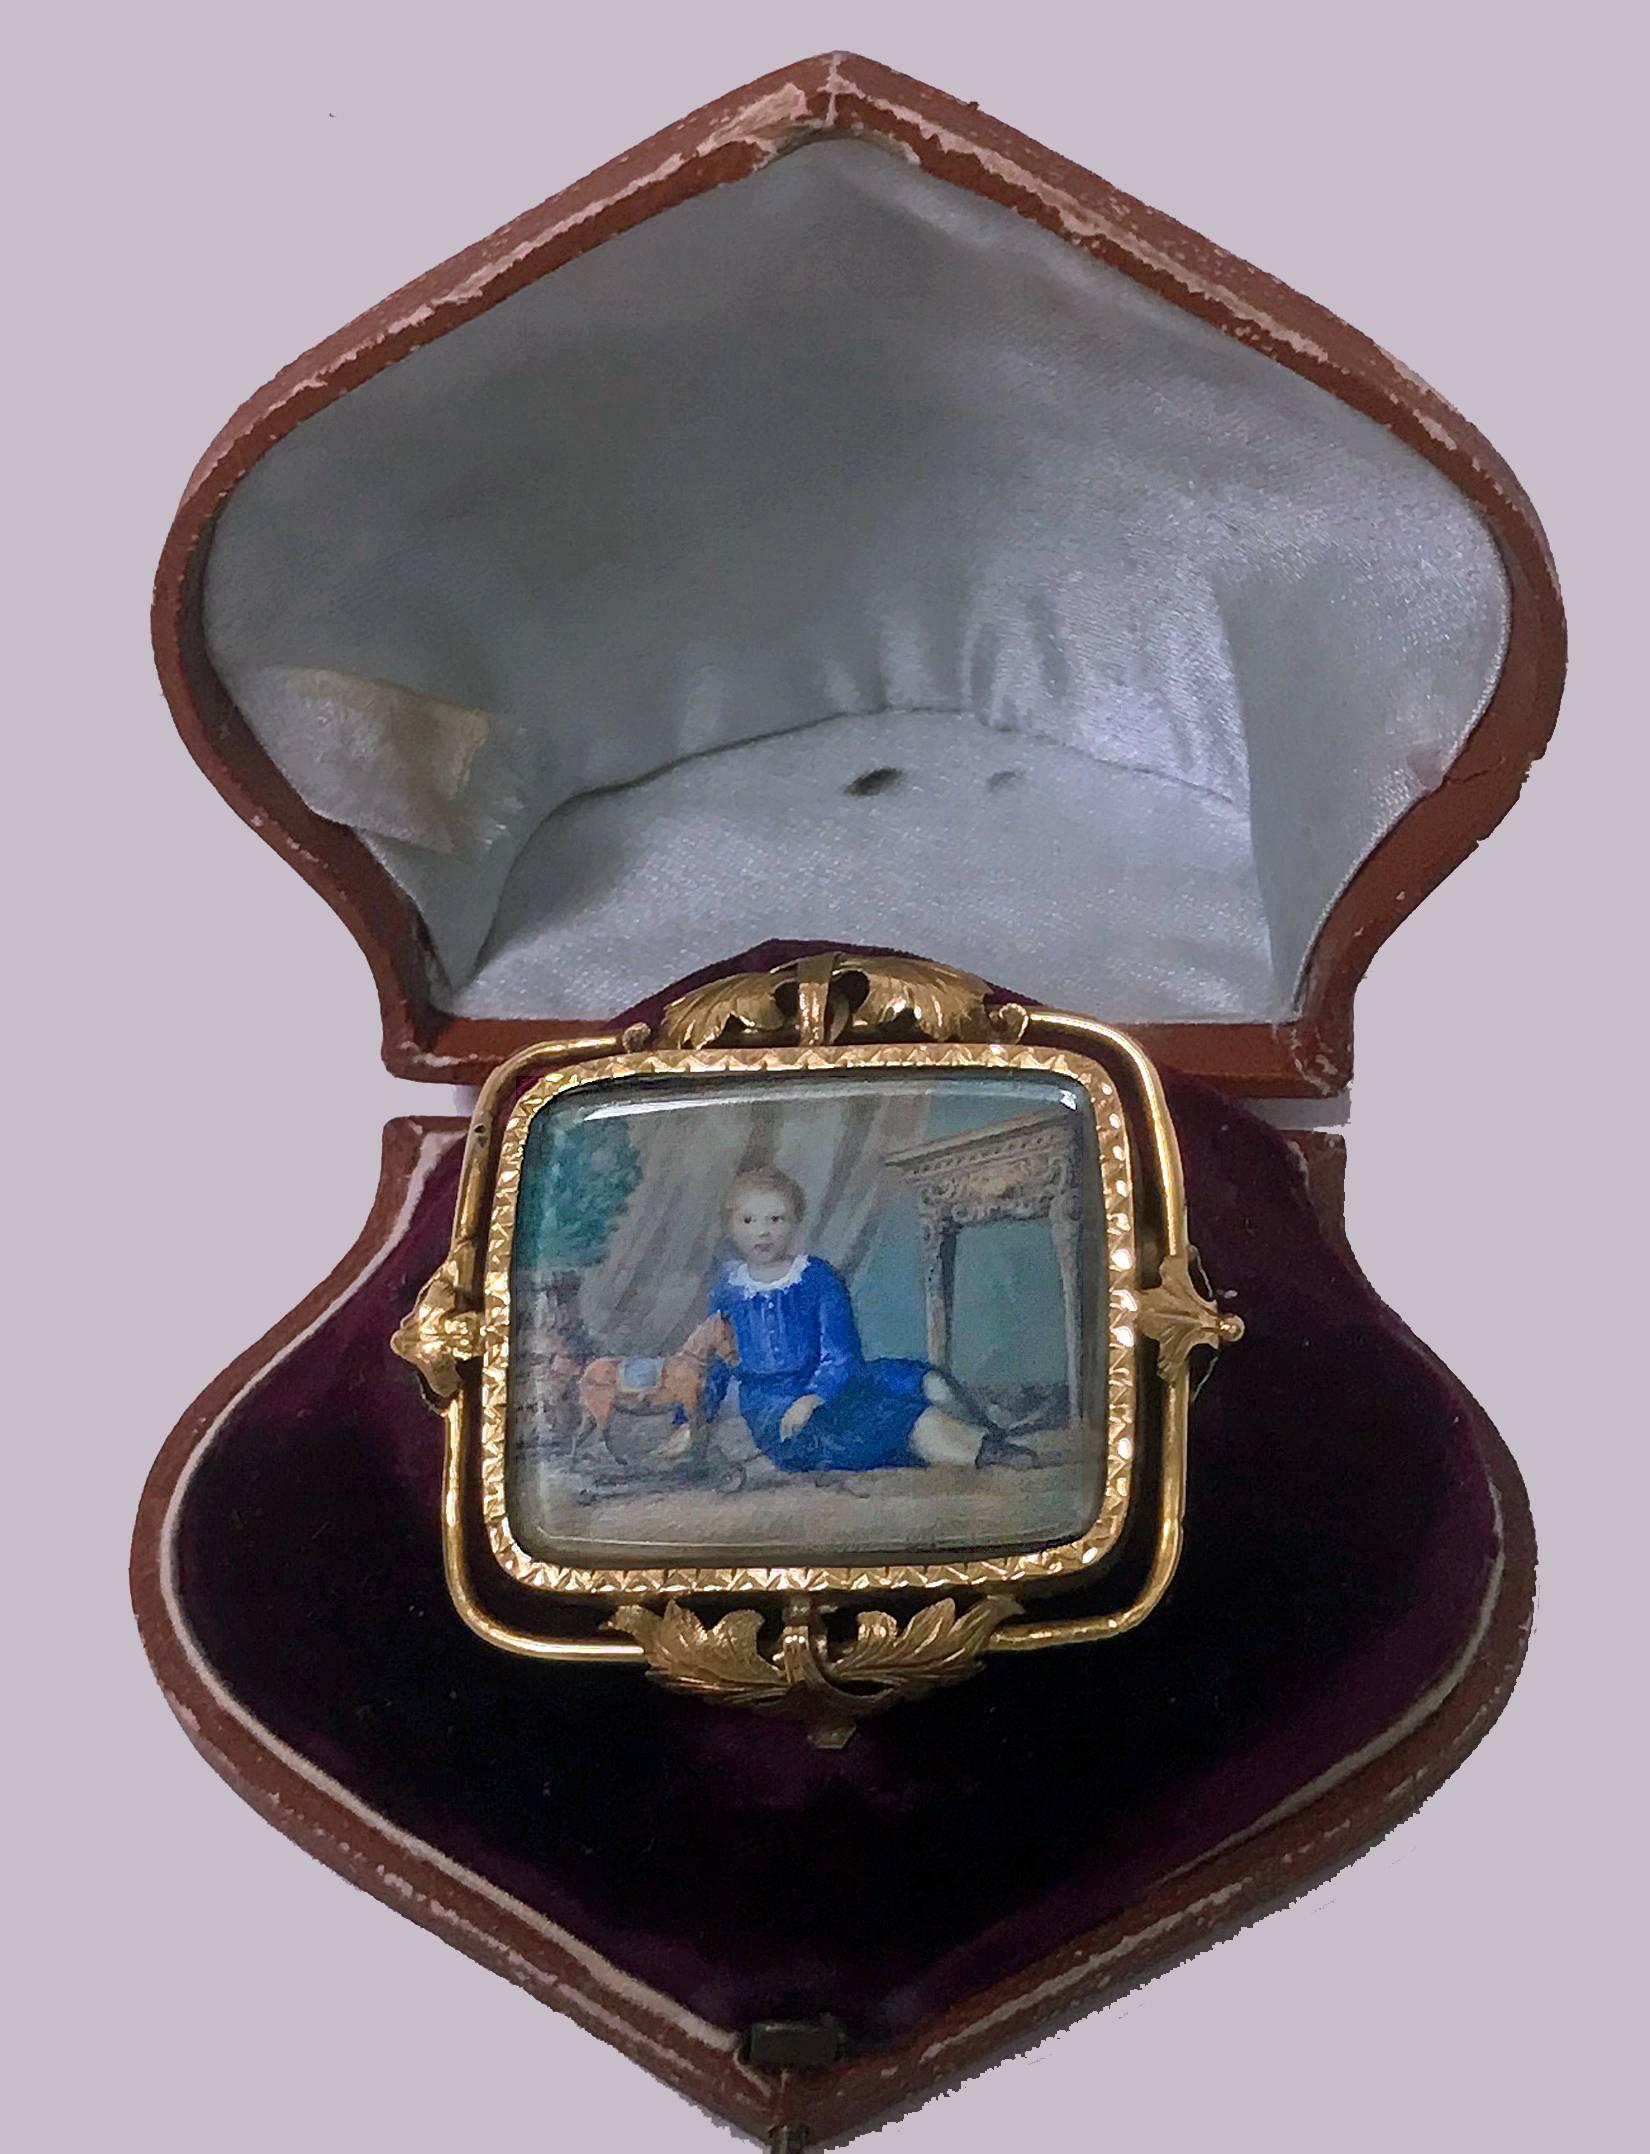 Antique Portrait Miniature original beveled crystal, Swiss, C.1800, attributed Anton Graff, depicting a boy with pull toy and orange tree, foliate gold (tests as 18K) frame (minor solder at reverse), fitted box. Anton Graff (1736-1813) was among the